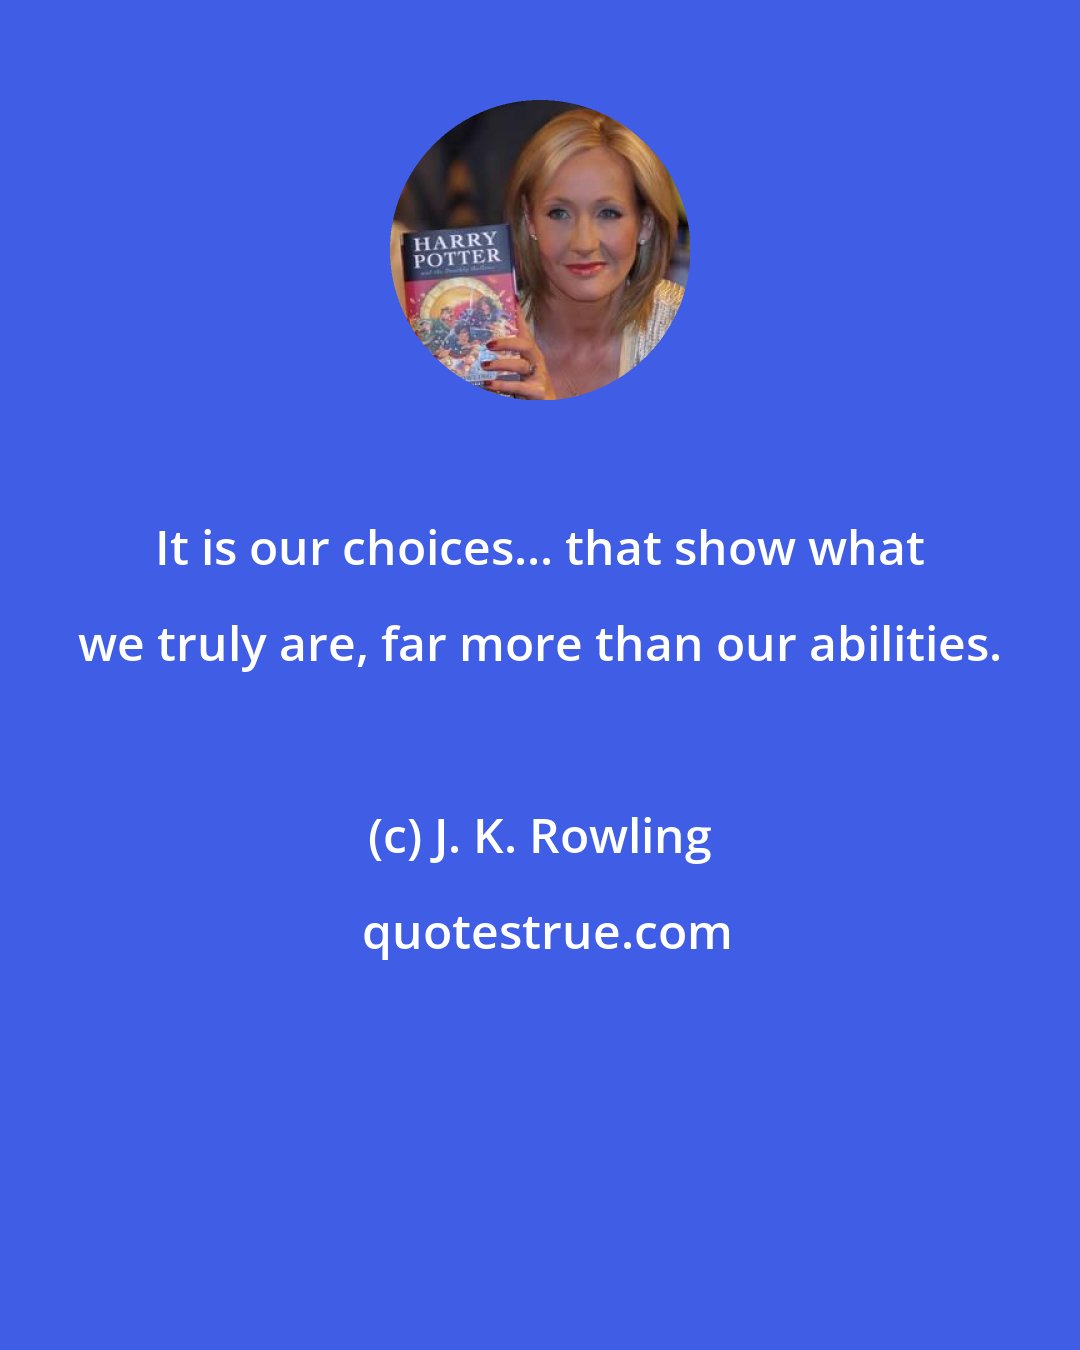 J. K. Rowling: It is our choices... that show what we truly are, far more than our abilities.